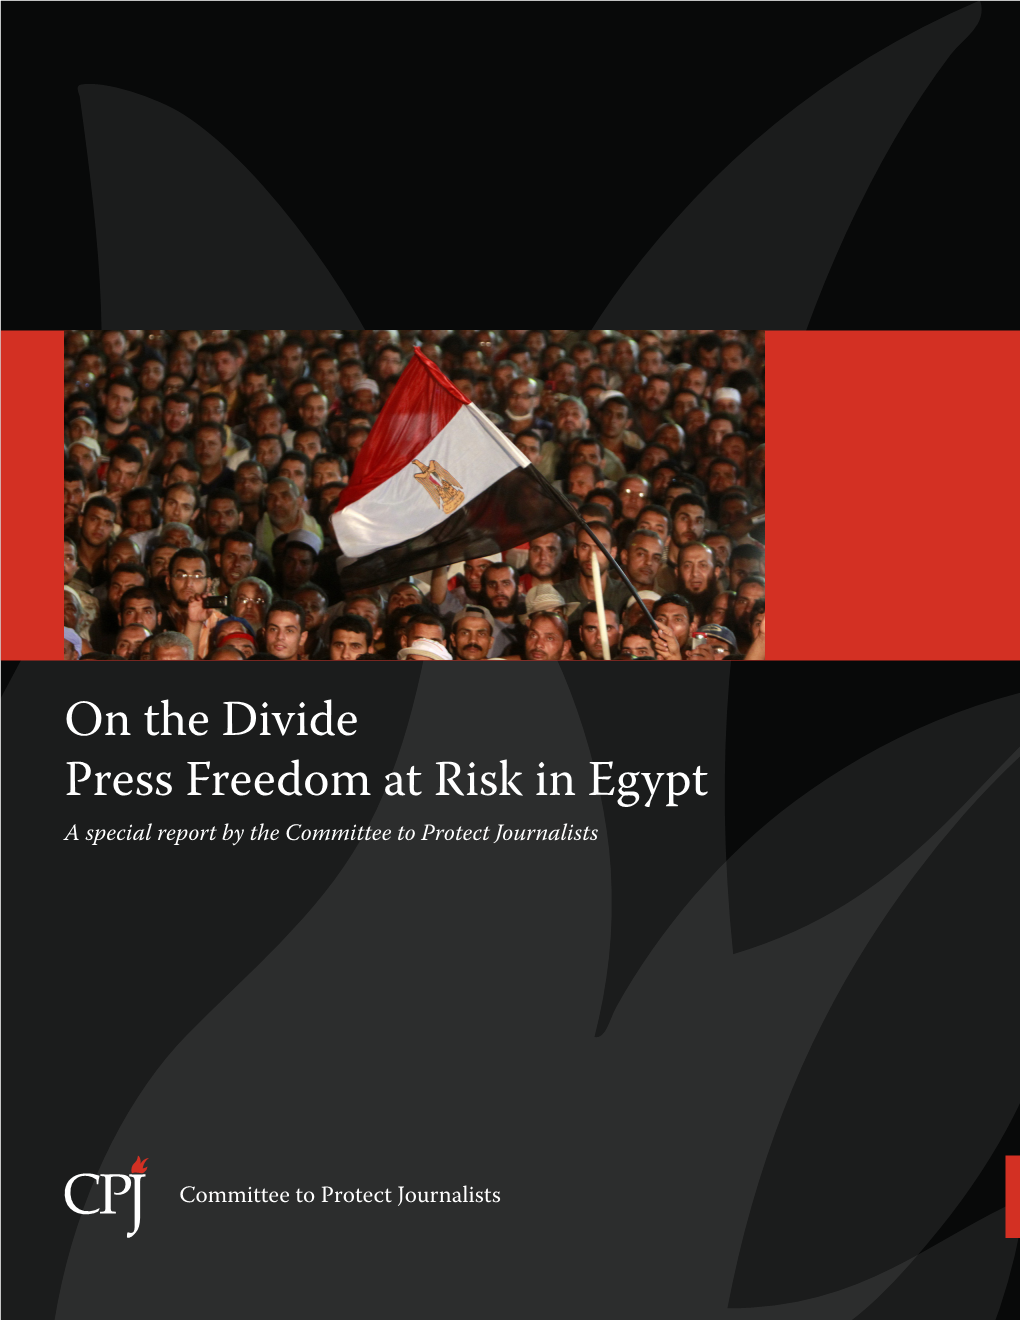 On the Divide Press Freedom at Risk in Egypt a Special Report by the Committee to Protect Journalists